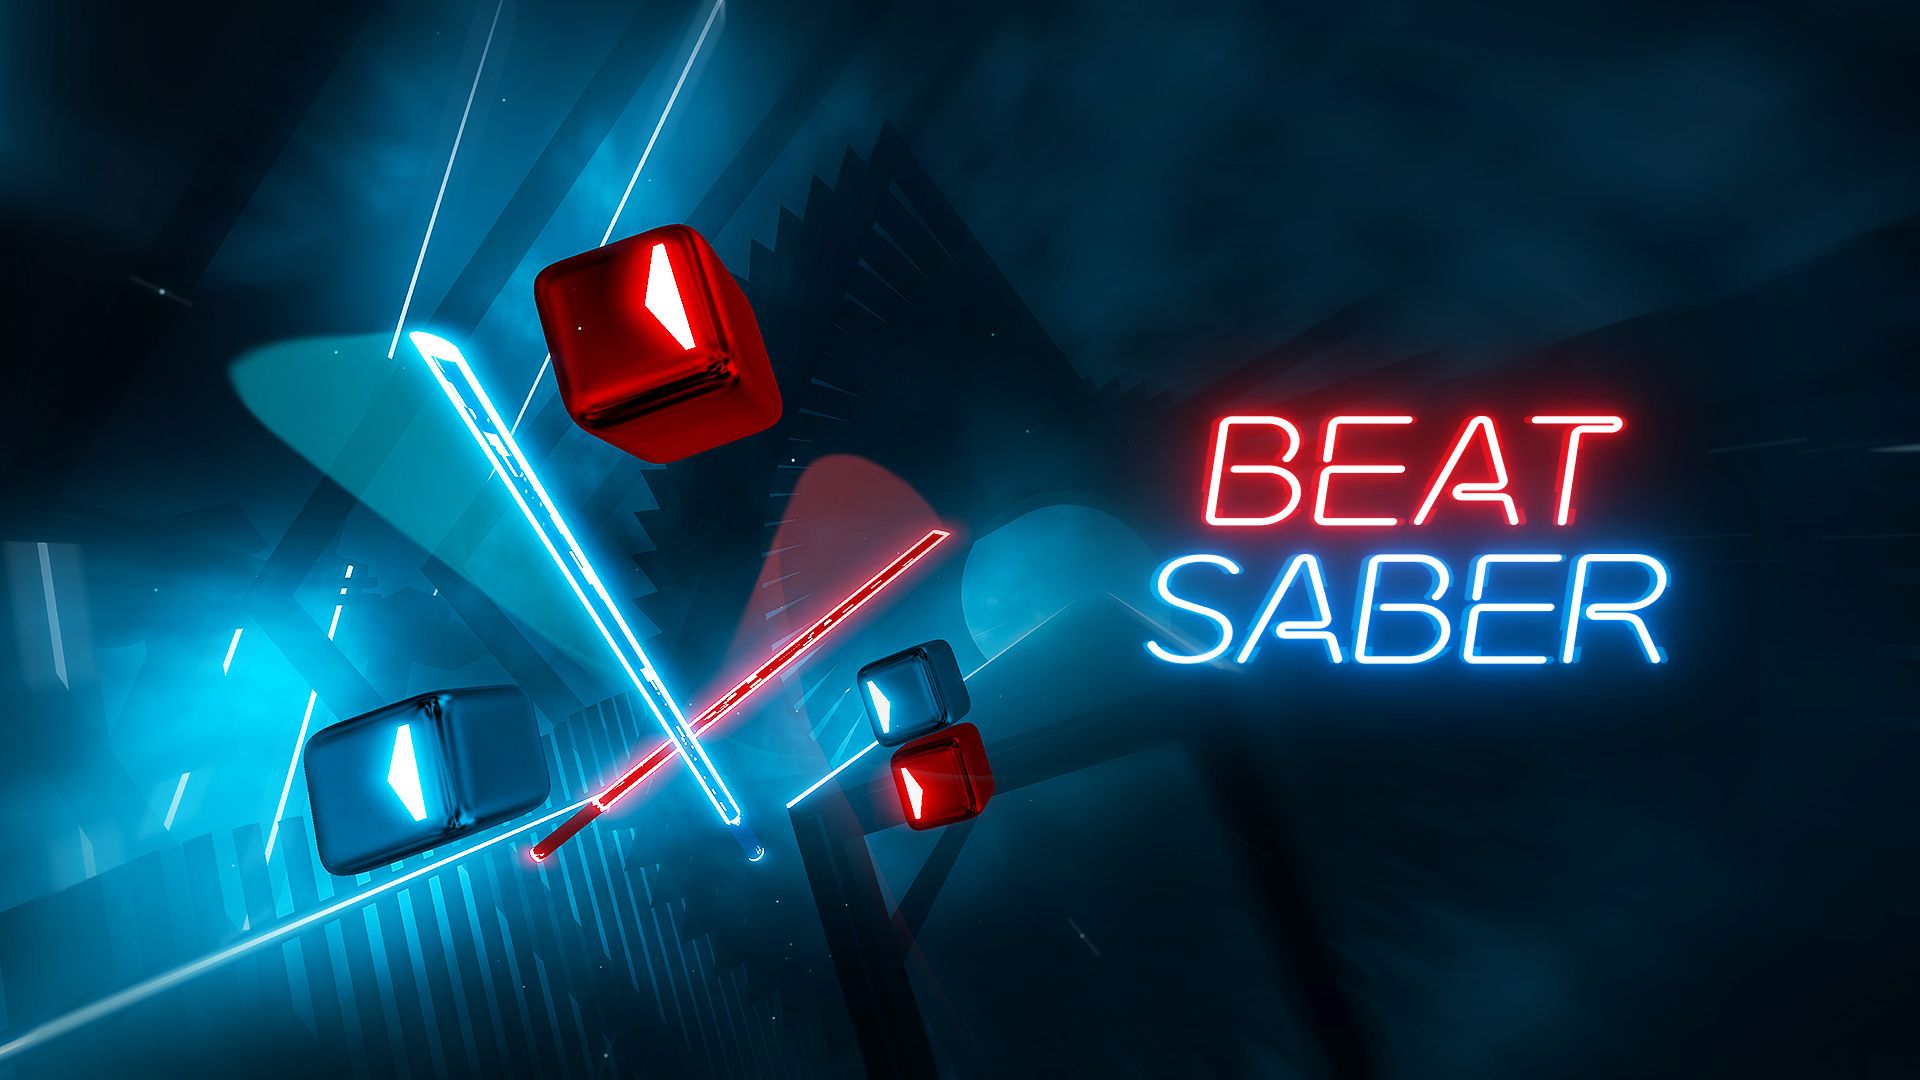 A promotional image for Beat Saber